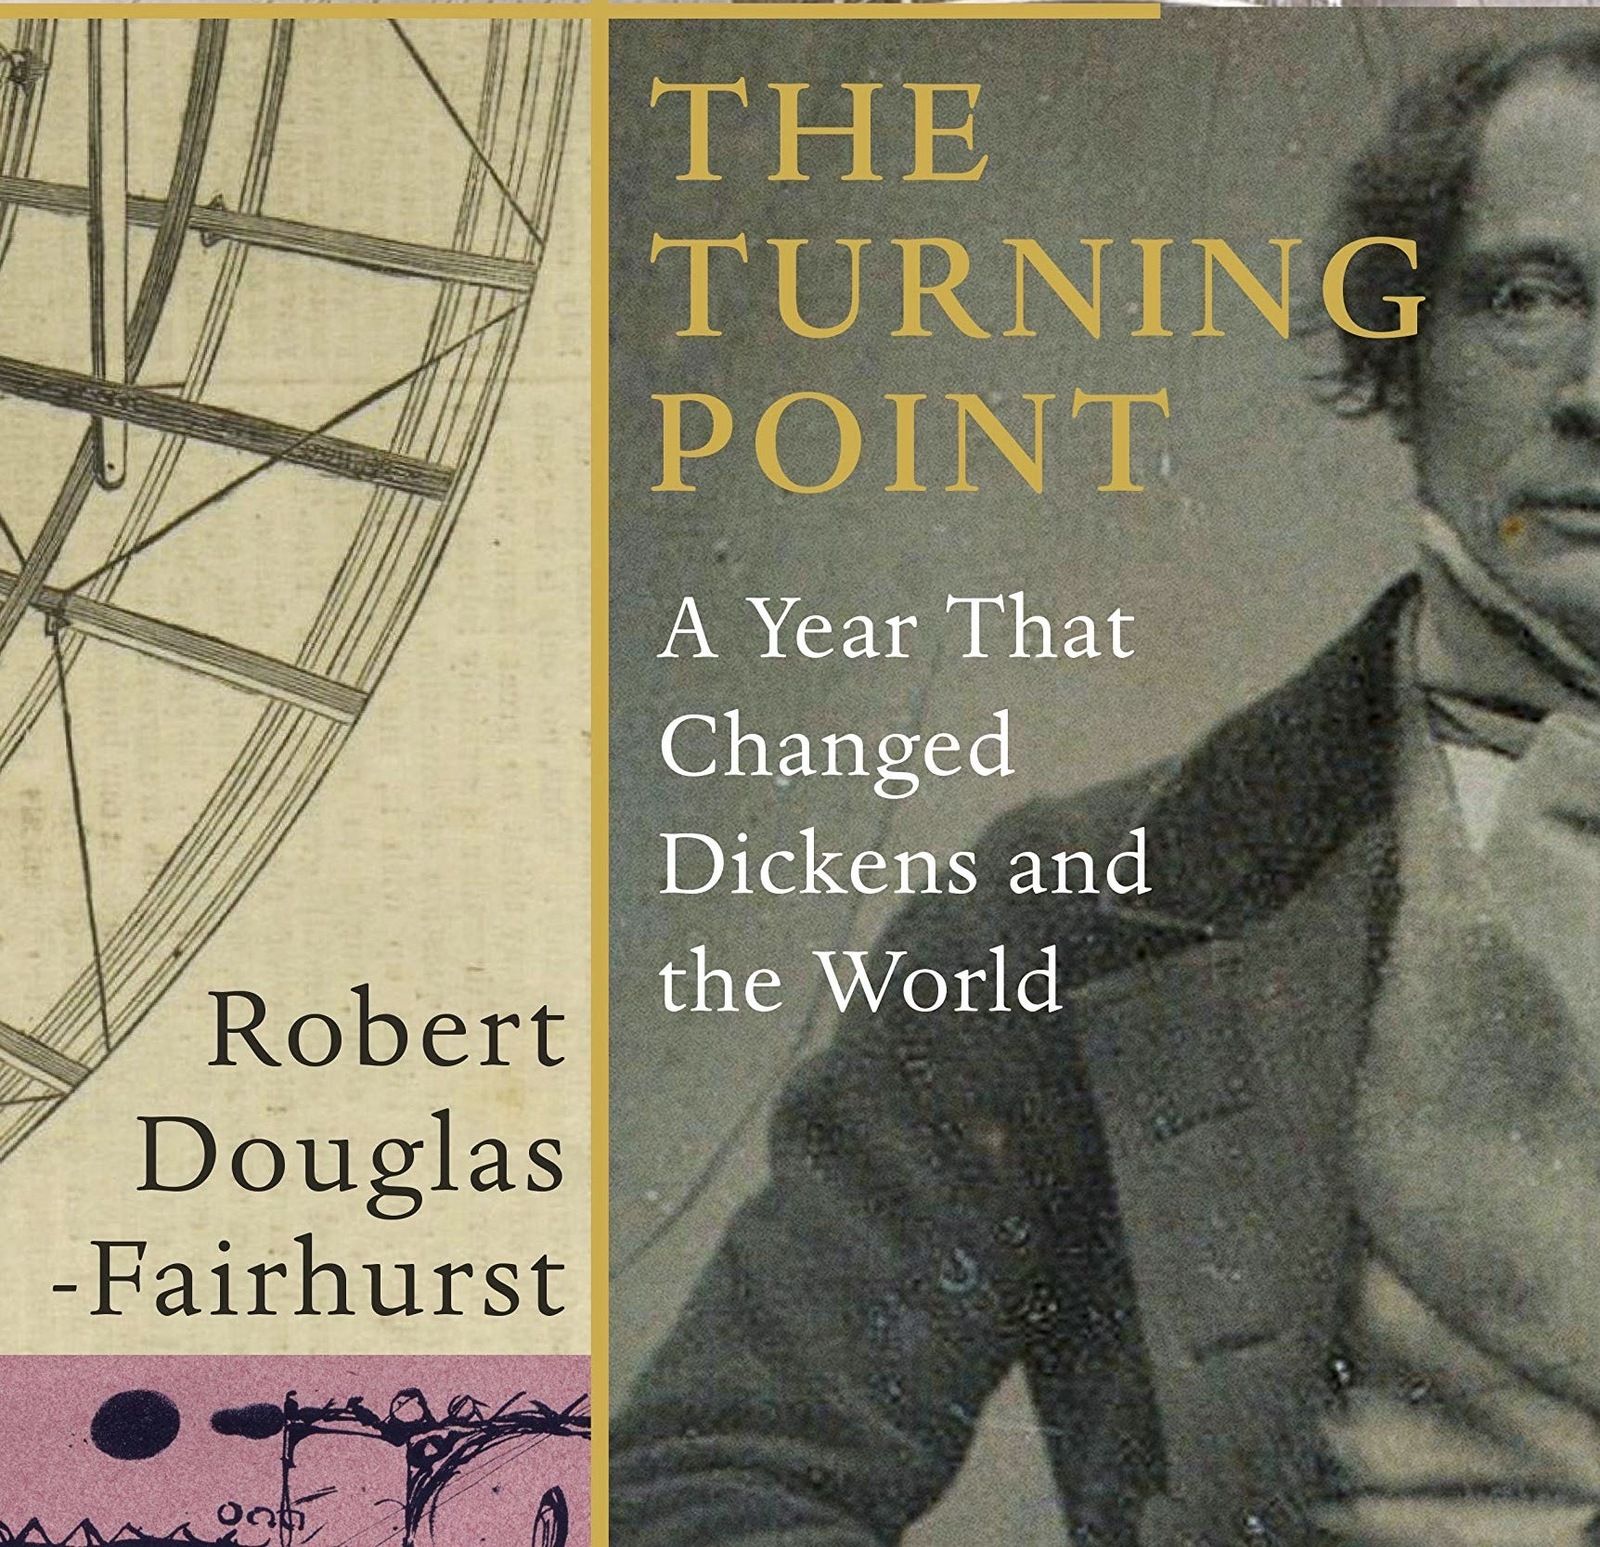 Robert Douglas-Fairhurst: A Year That Changed Dickens and the World